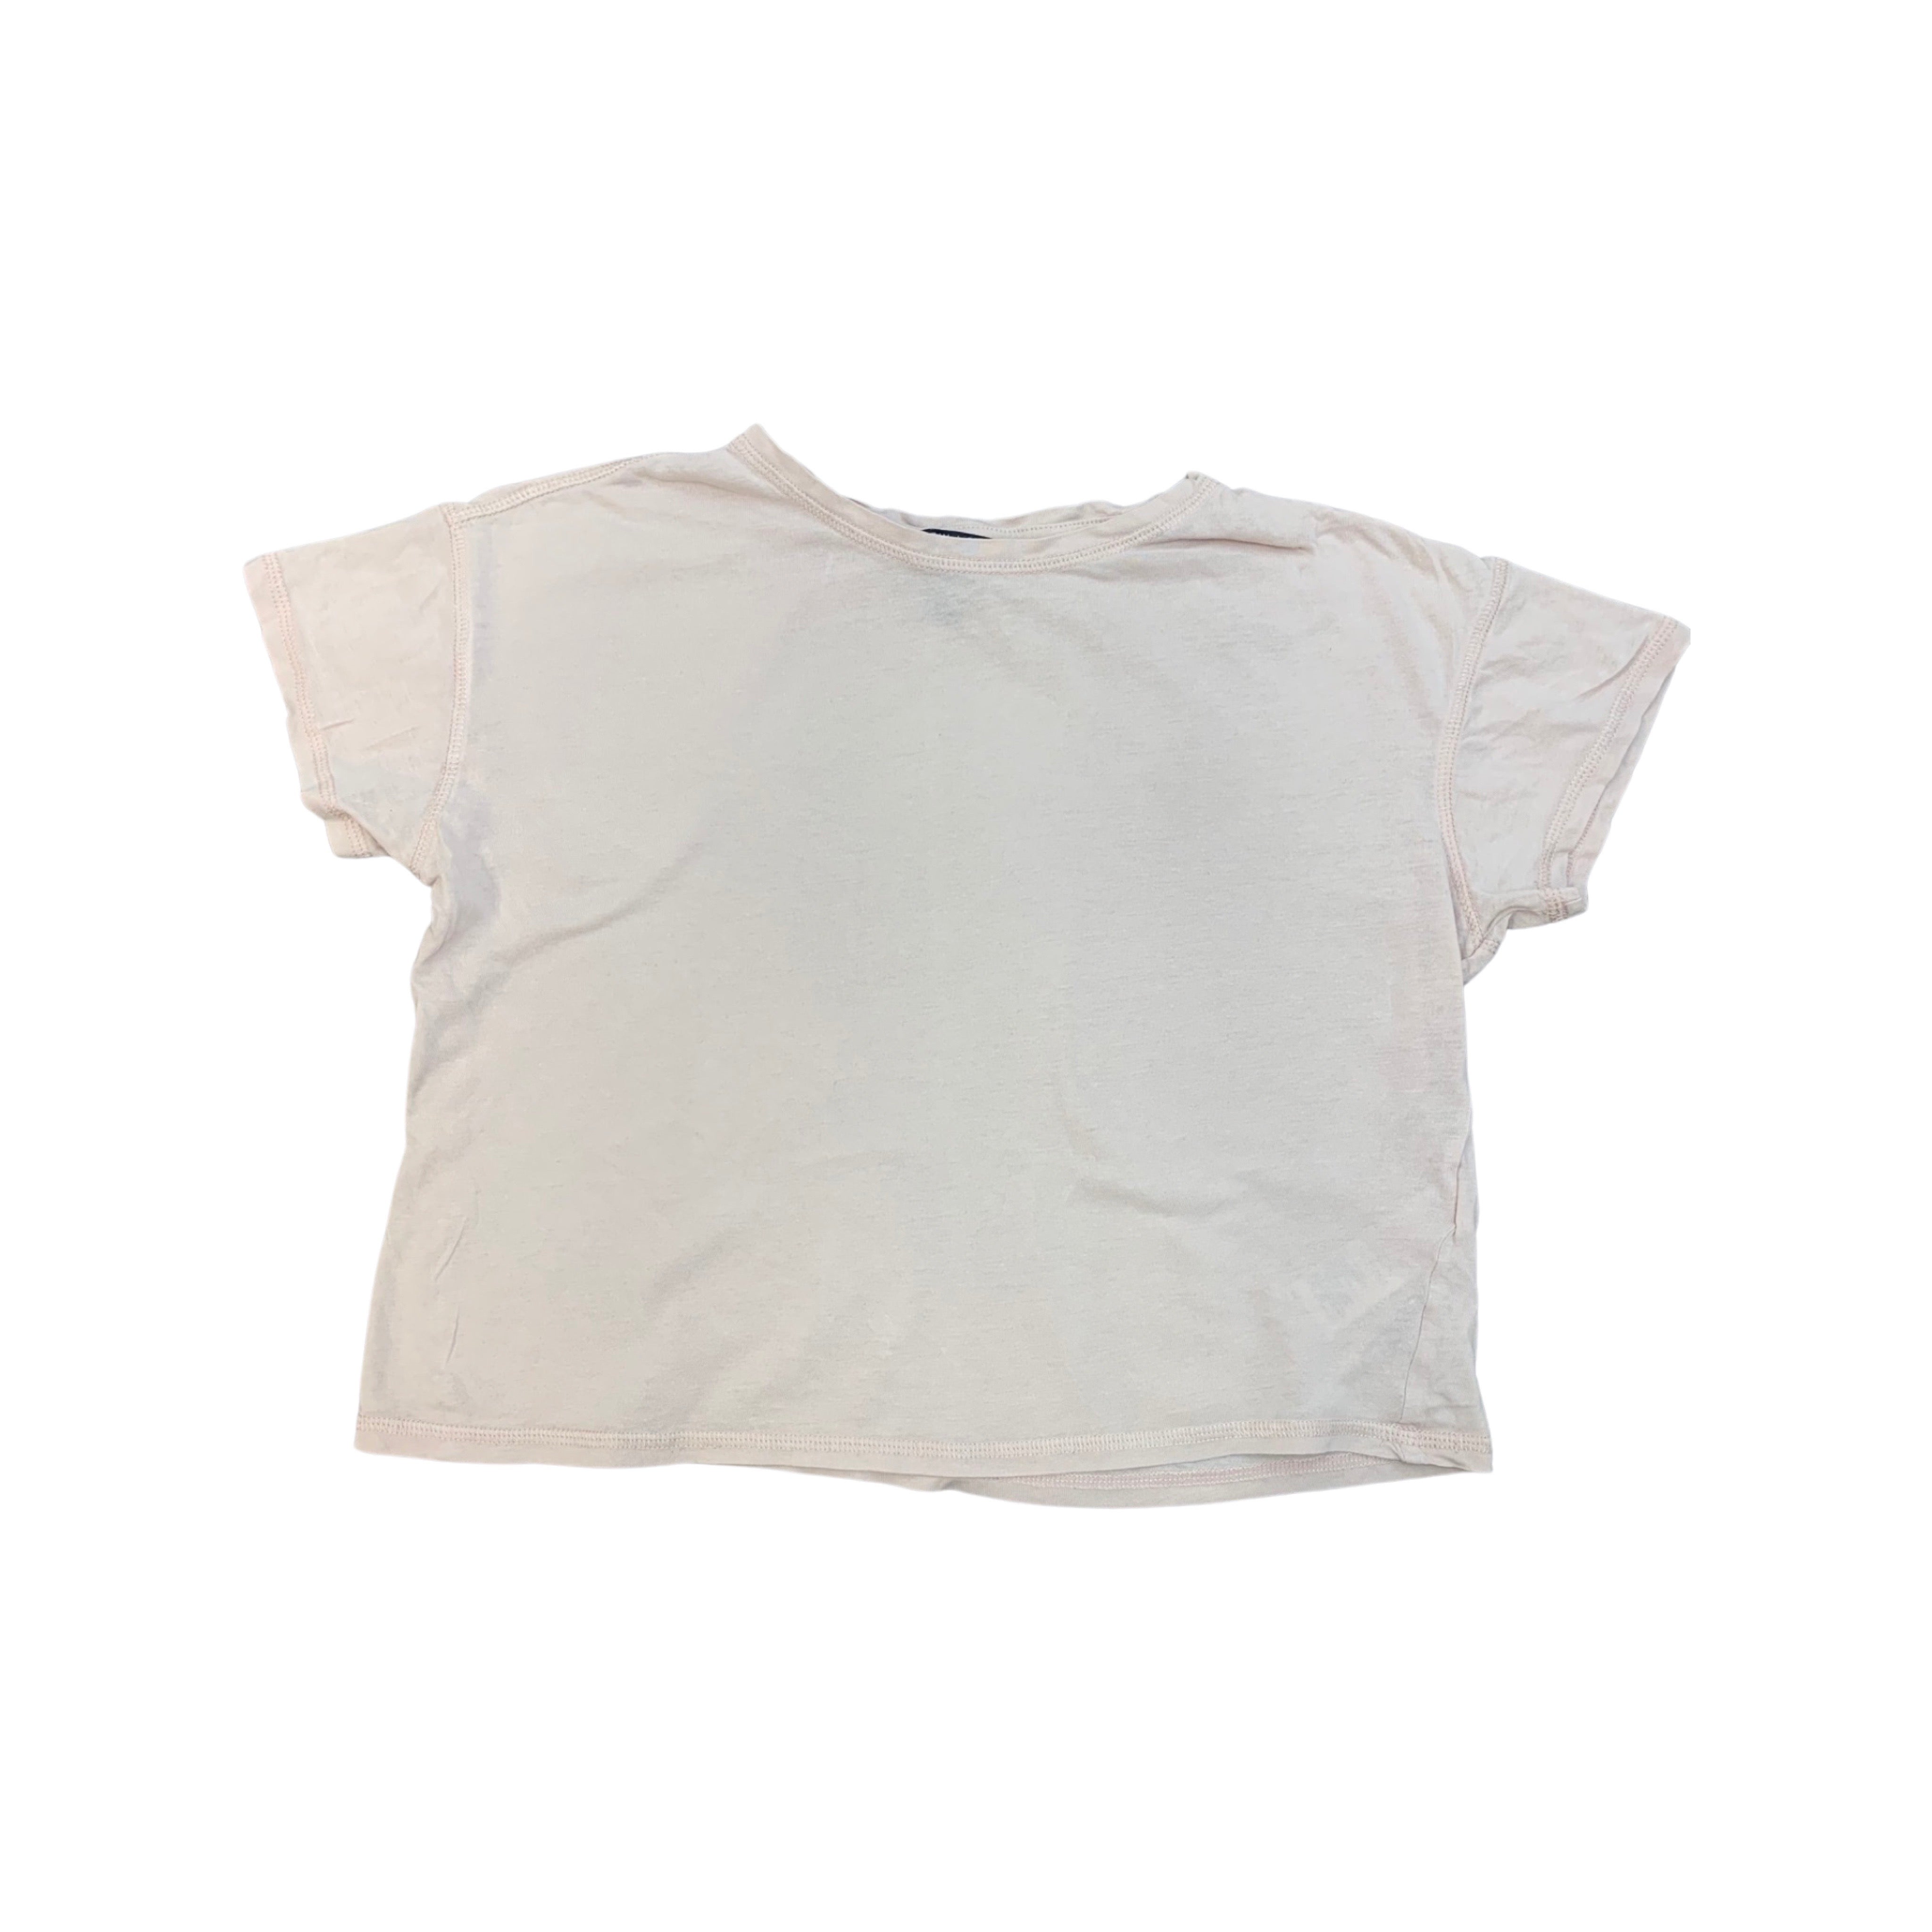 New Look Cropped T Shirt Girls 10-11 Years Playwear